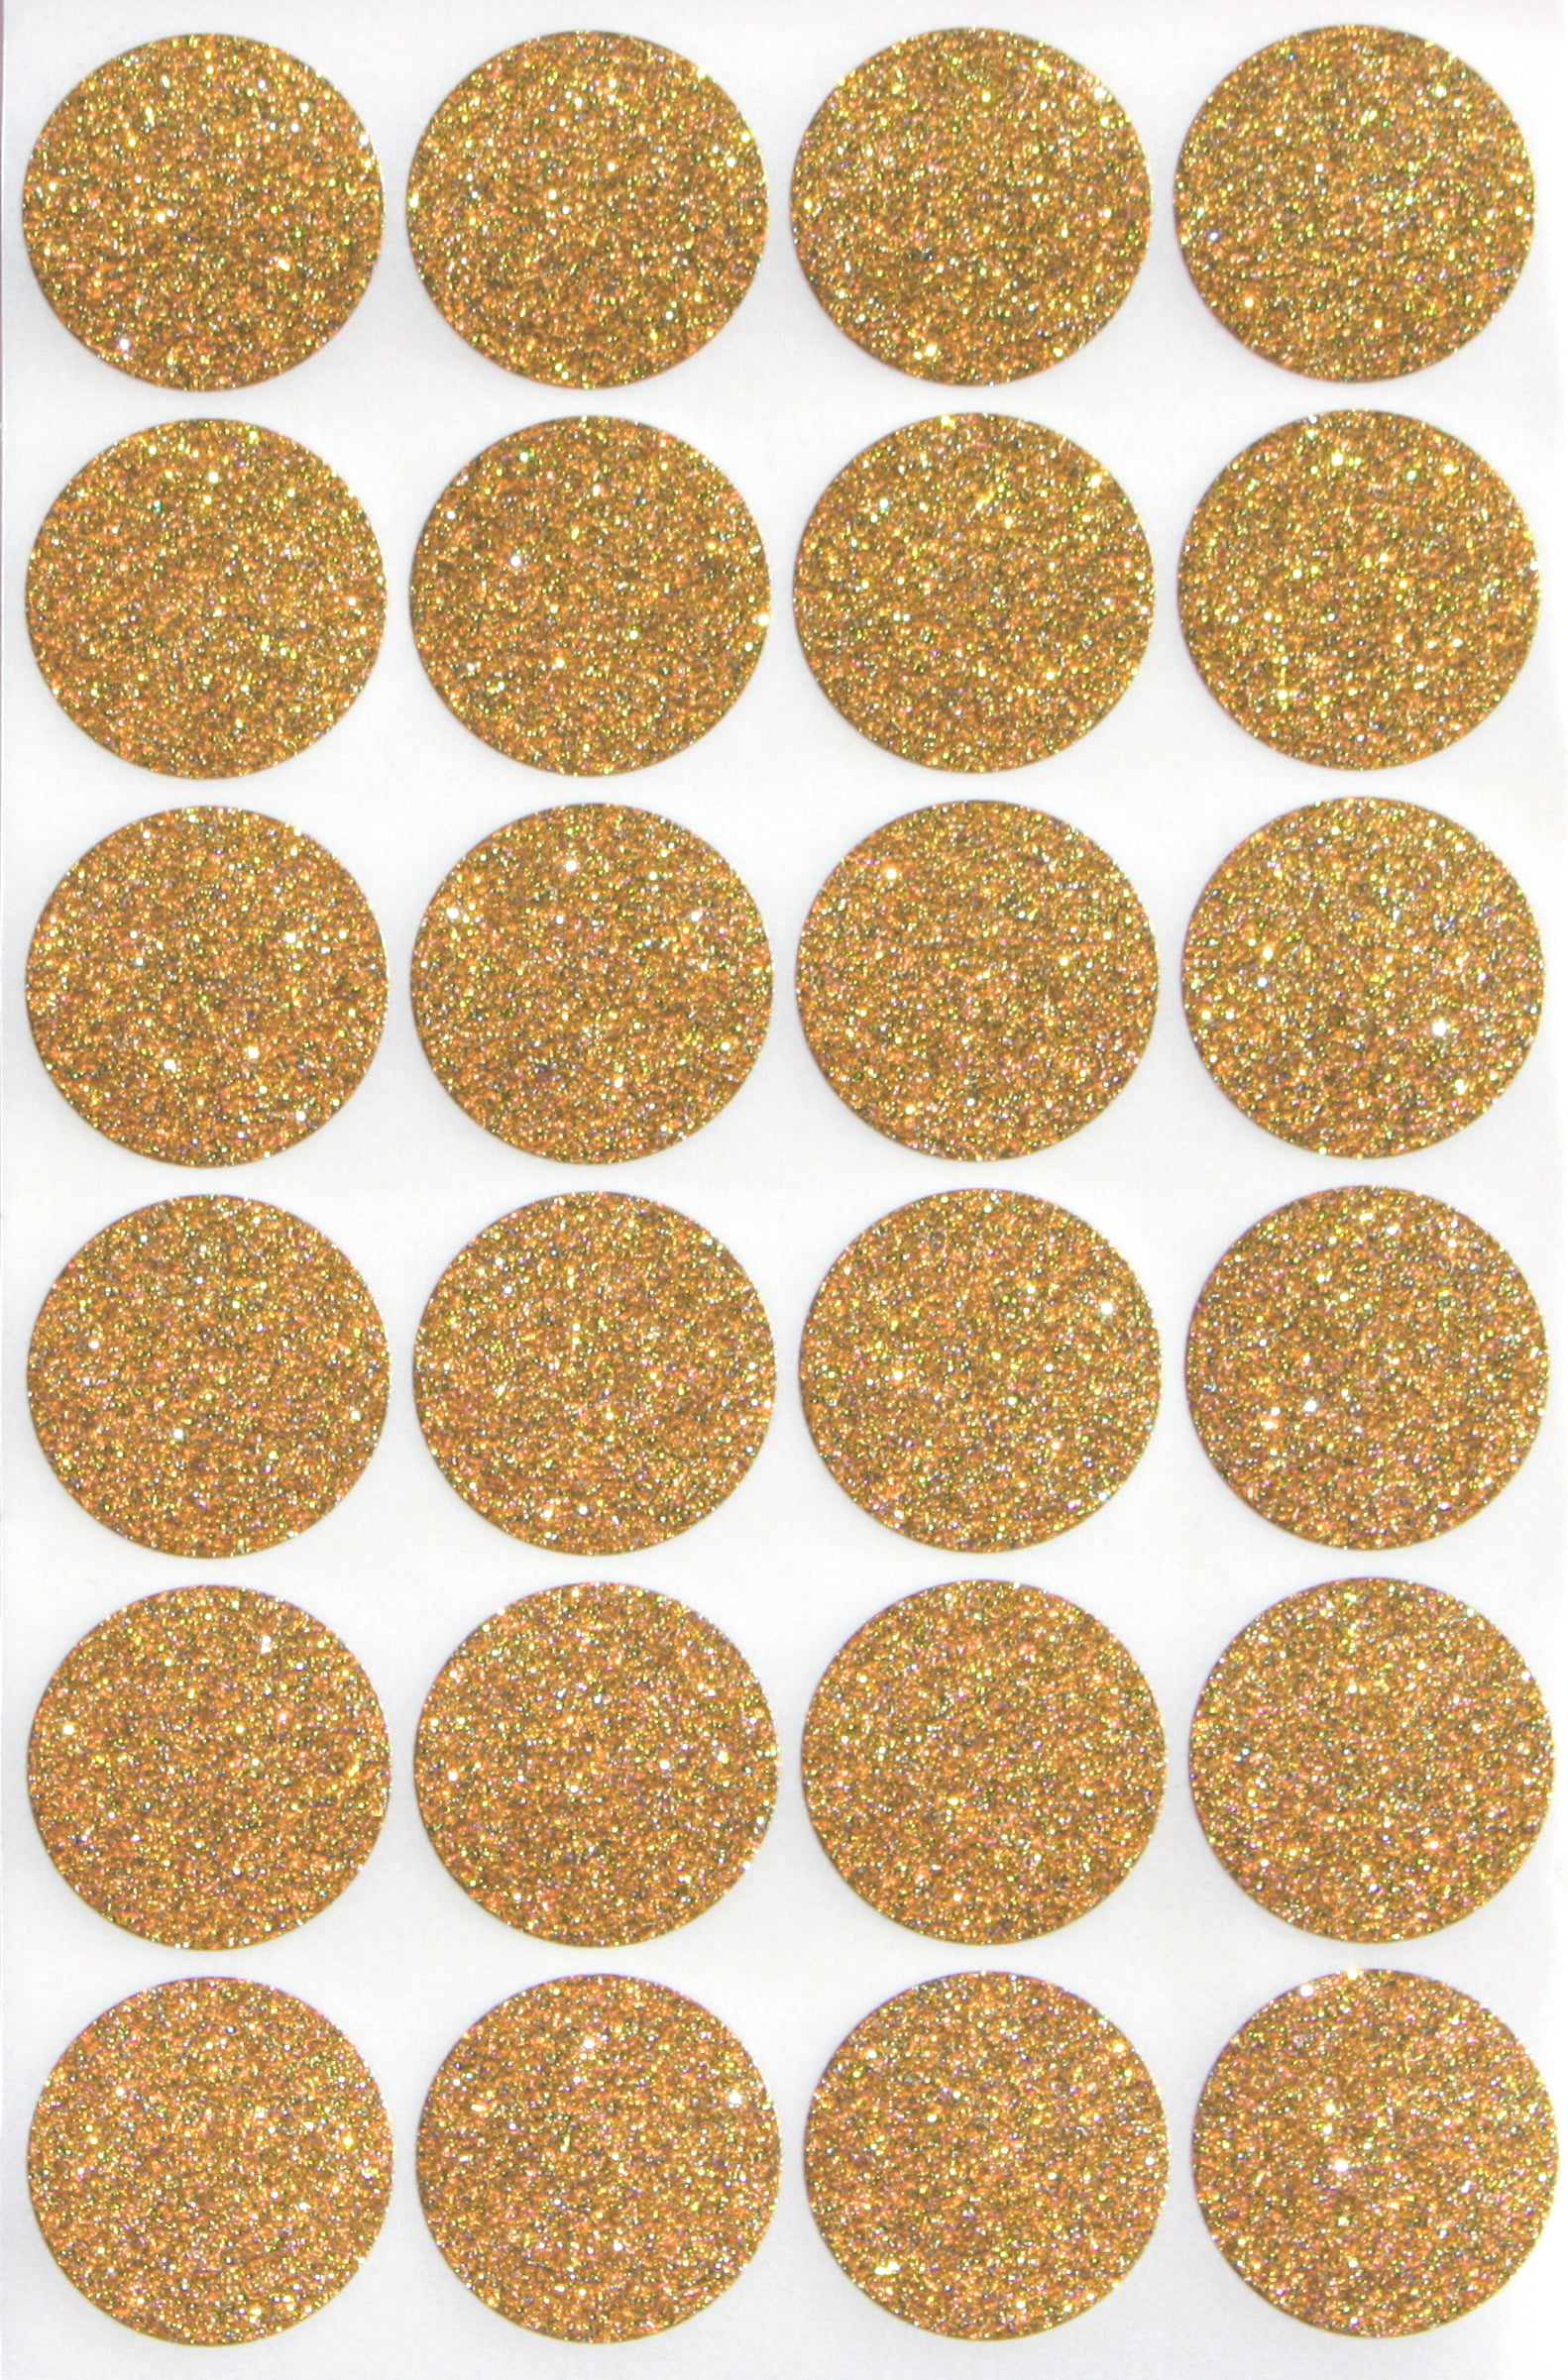 288 Pack Glitter Self Adhesive Label 1.2 inch Small Oval Shape Personalized Handmade Gift Seal Cards for Wedding Birthday Celebrating Party Favors Floral Thank You Stickers 12 Sheets, Gold 